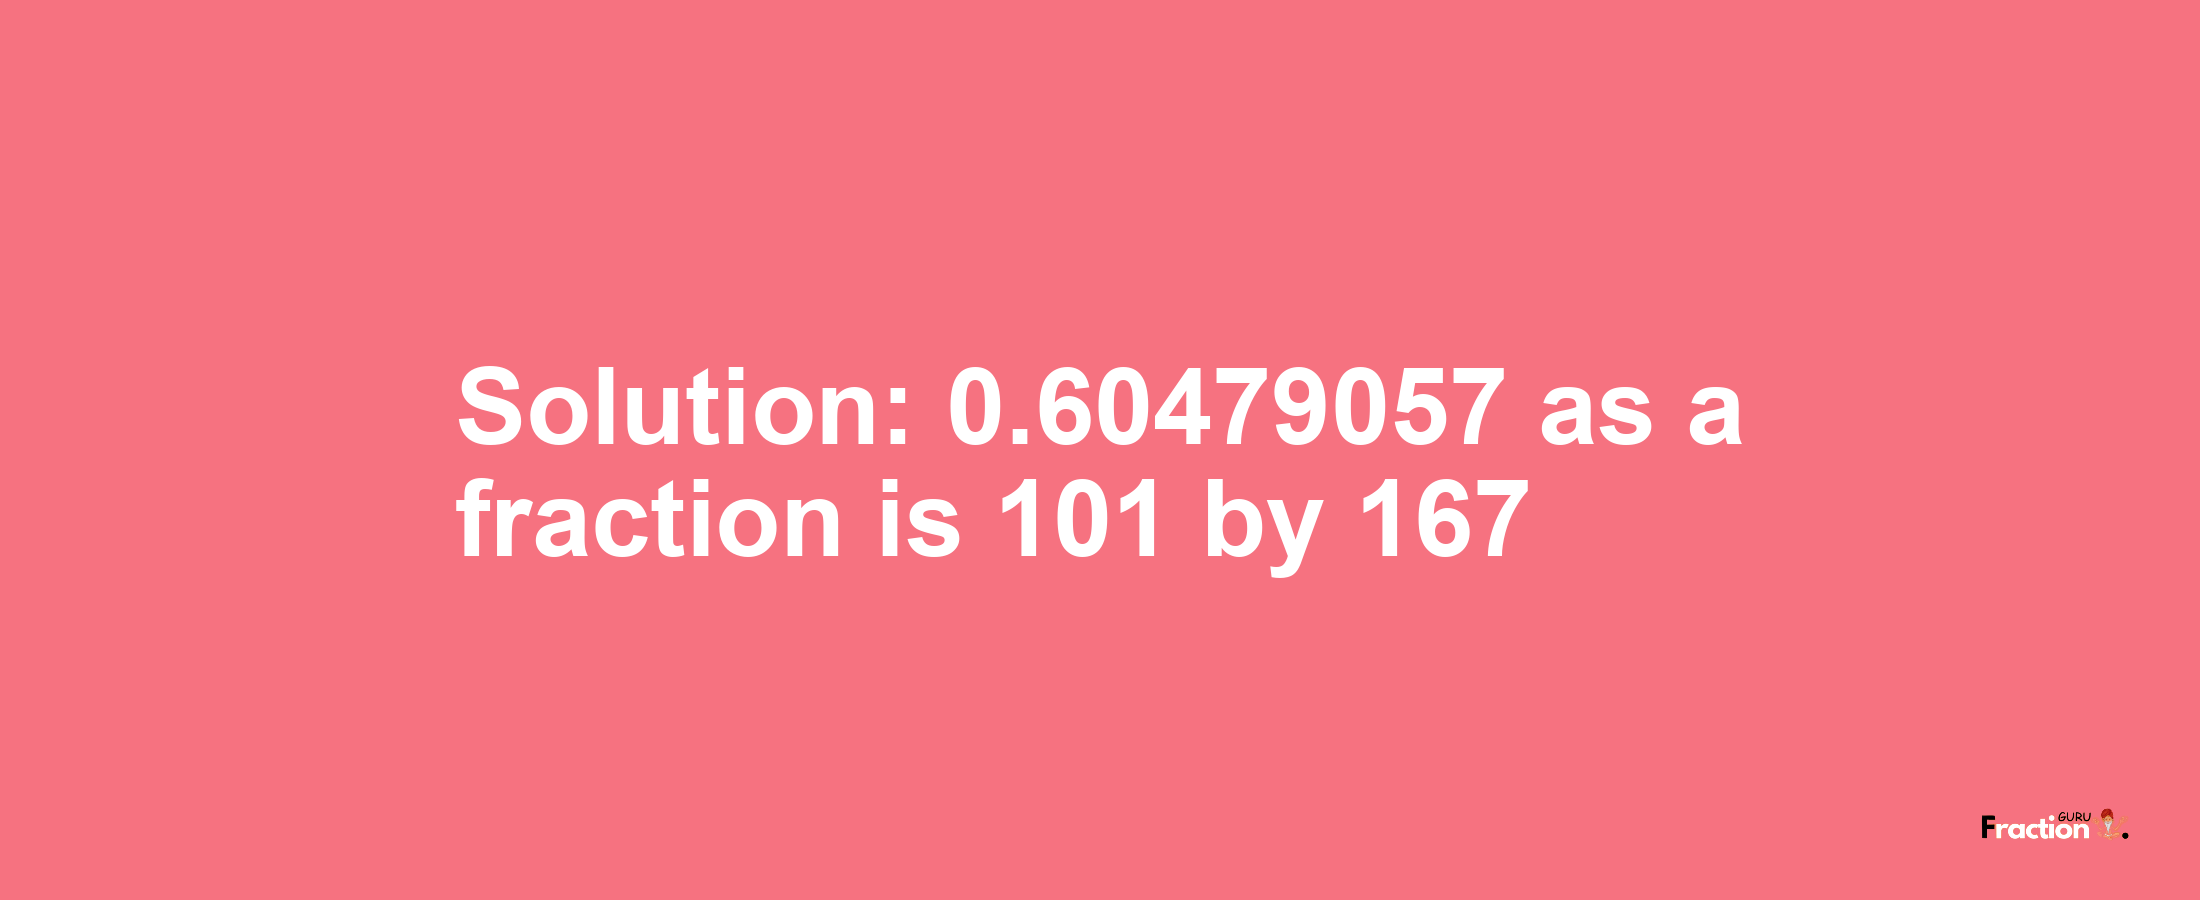 Solution:0.60479057 as a fraction is 101/167